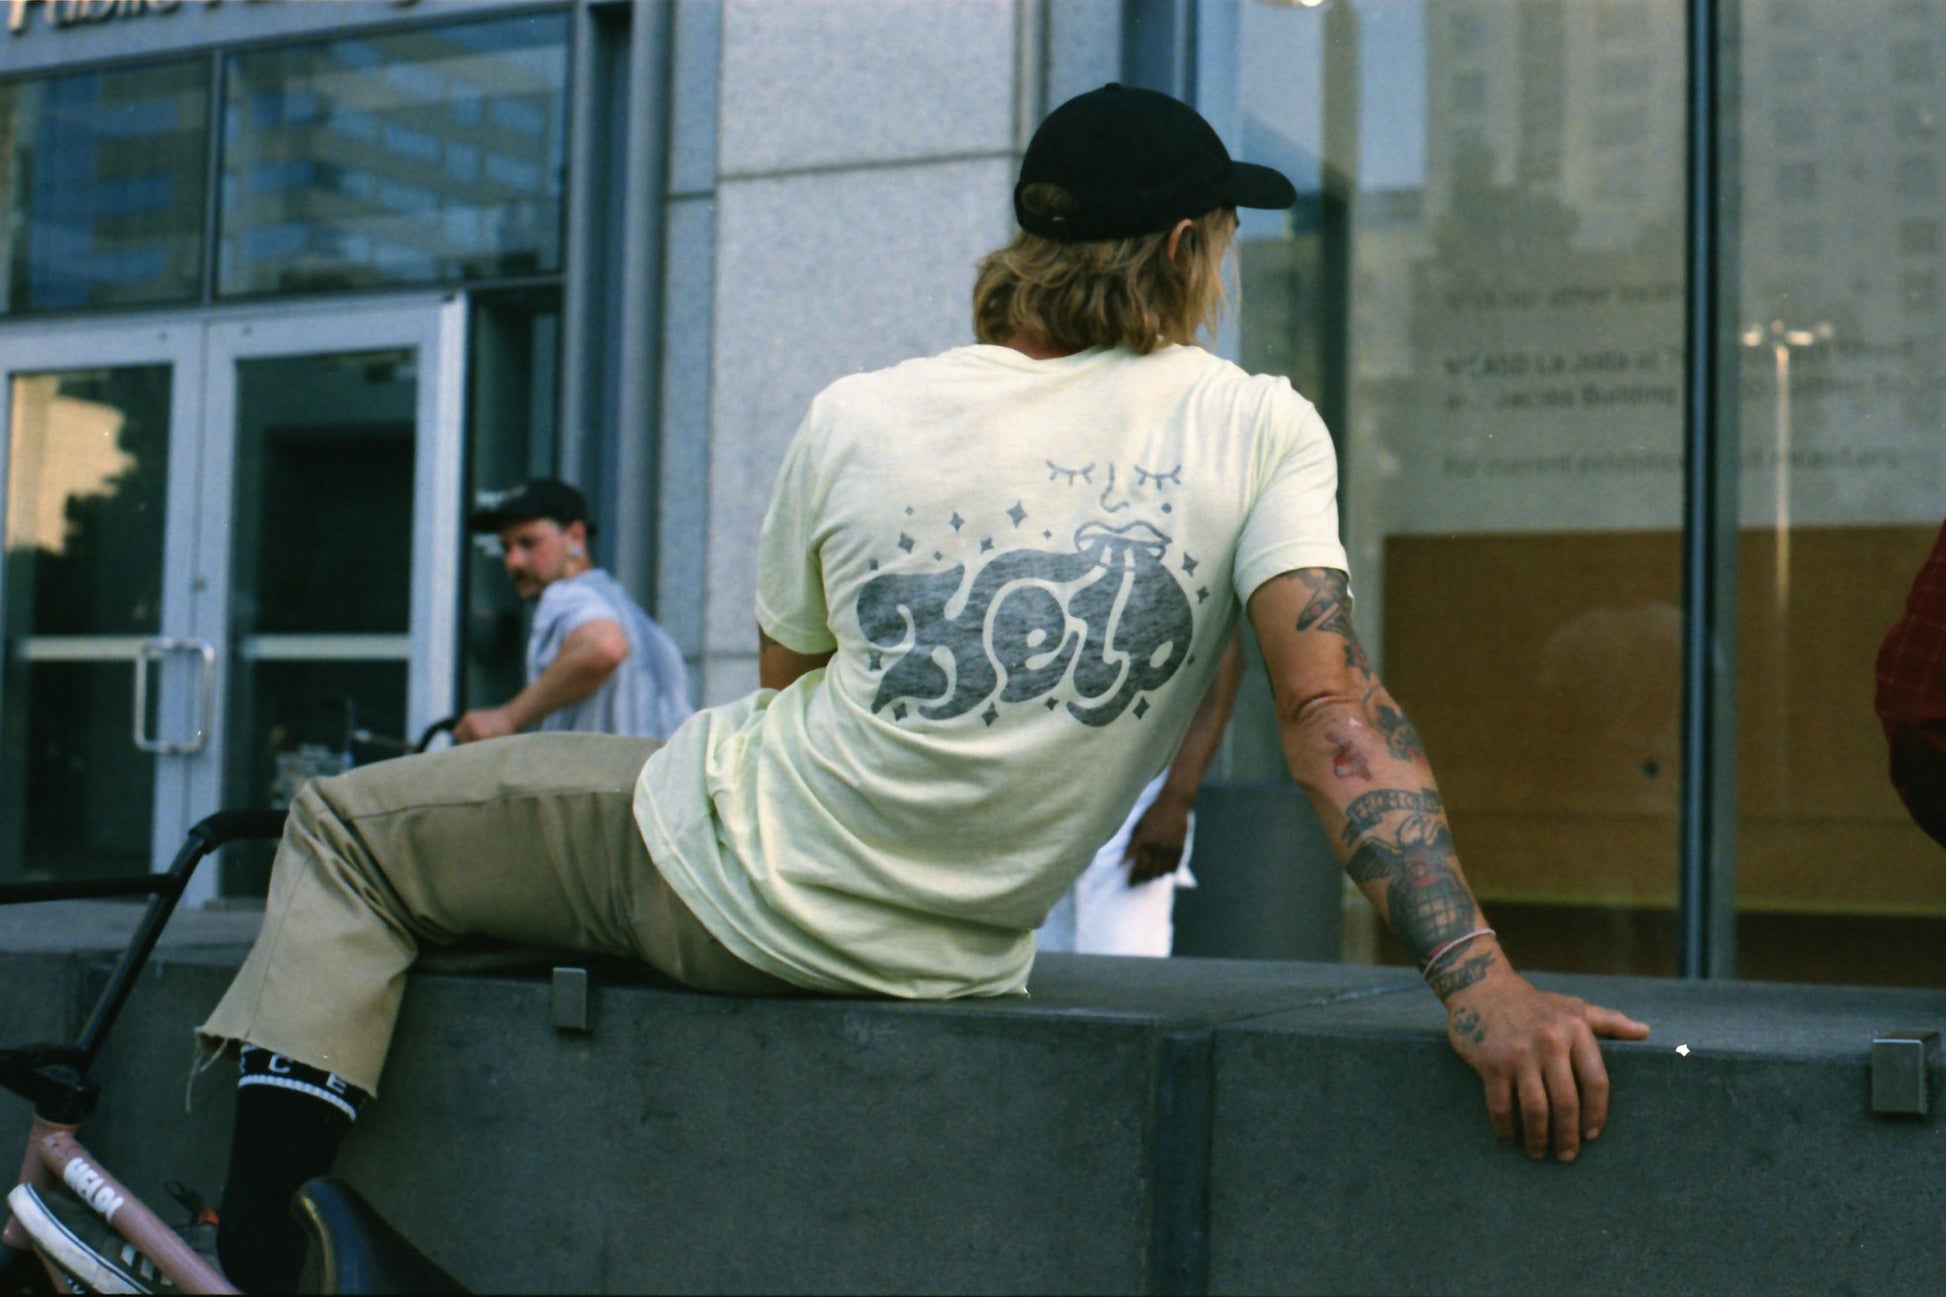 Nathan Williams sitting on a ledge with his back to the camera. he is wearing the "Daily Tee".